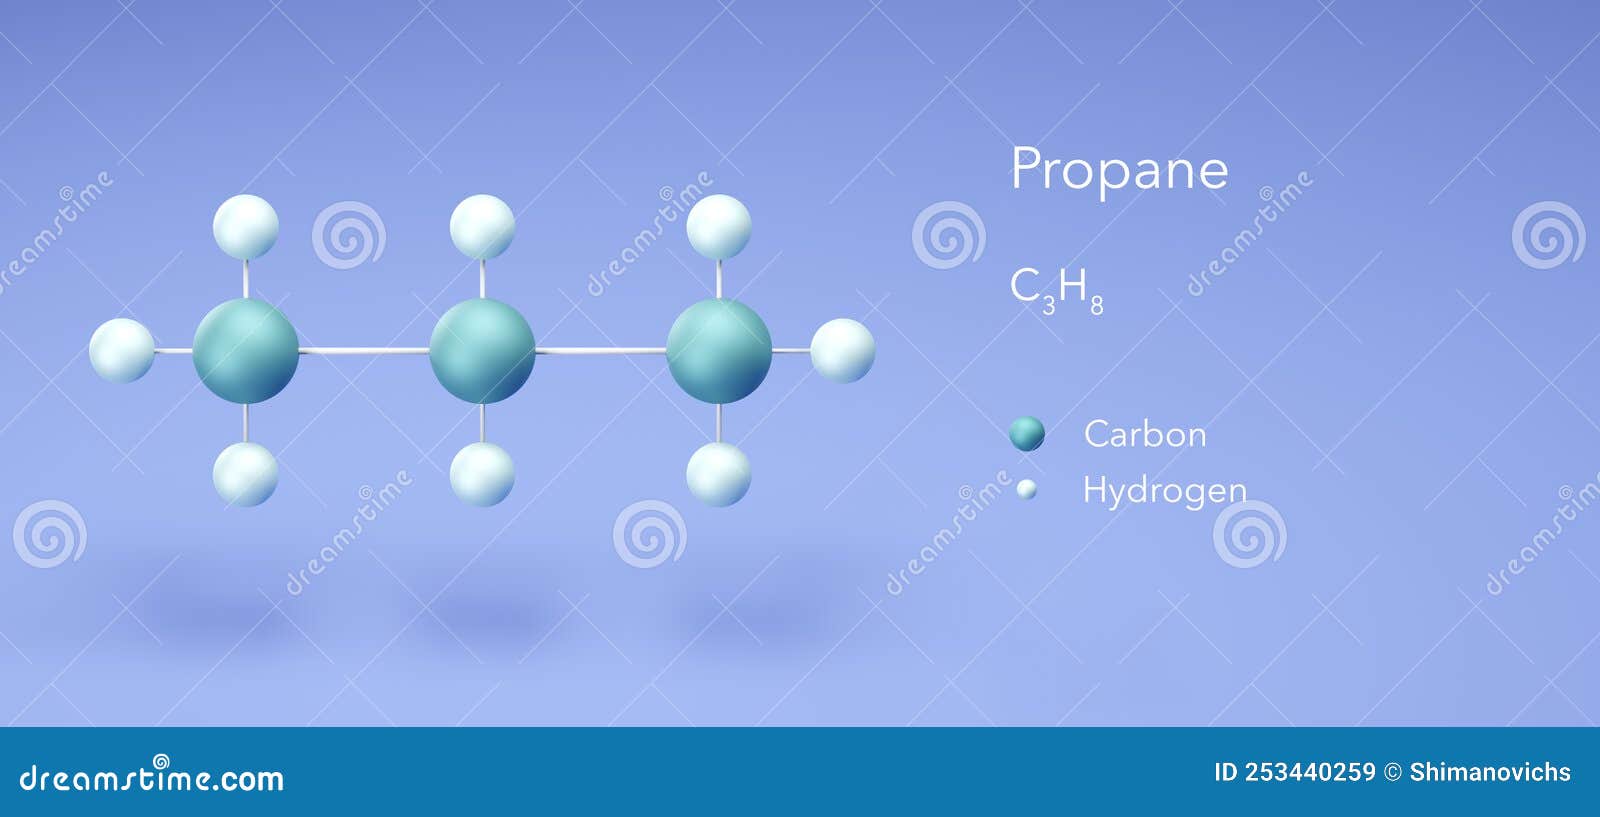 Propane, Natural Colorless Gas, Molecular Structures, 3d Rendering ...